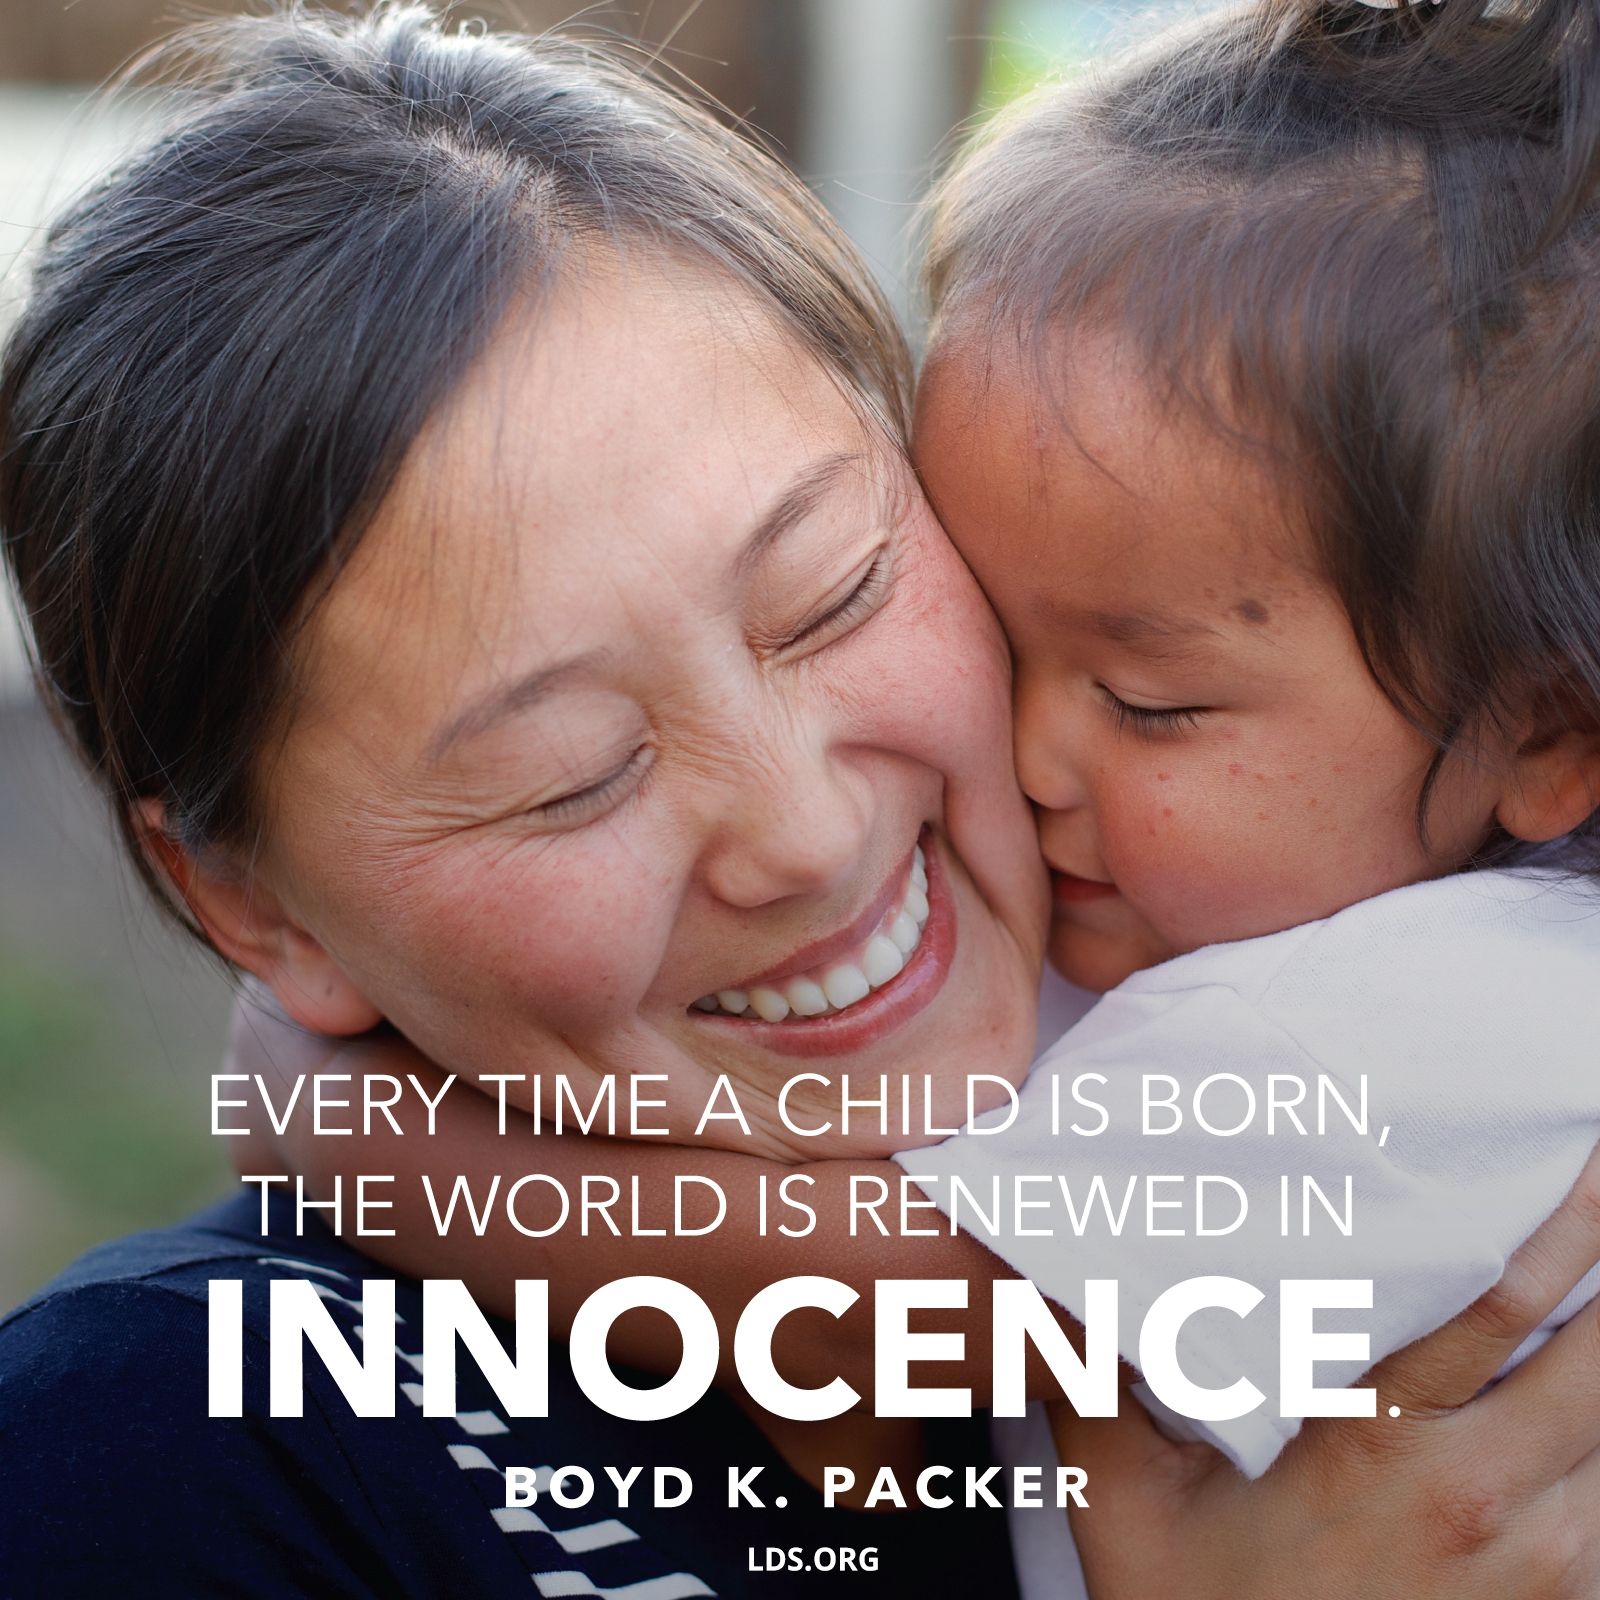 “Every time a child is born, the world is renewed in innocence.”—President Boyd K. Packer, “Children” © See Individual Images ipCode 1.